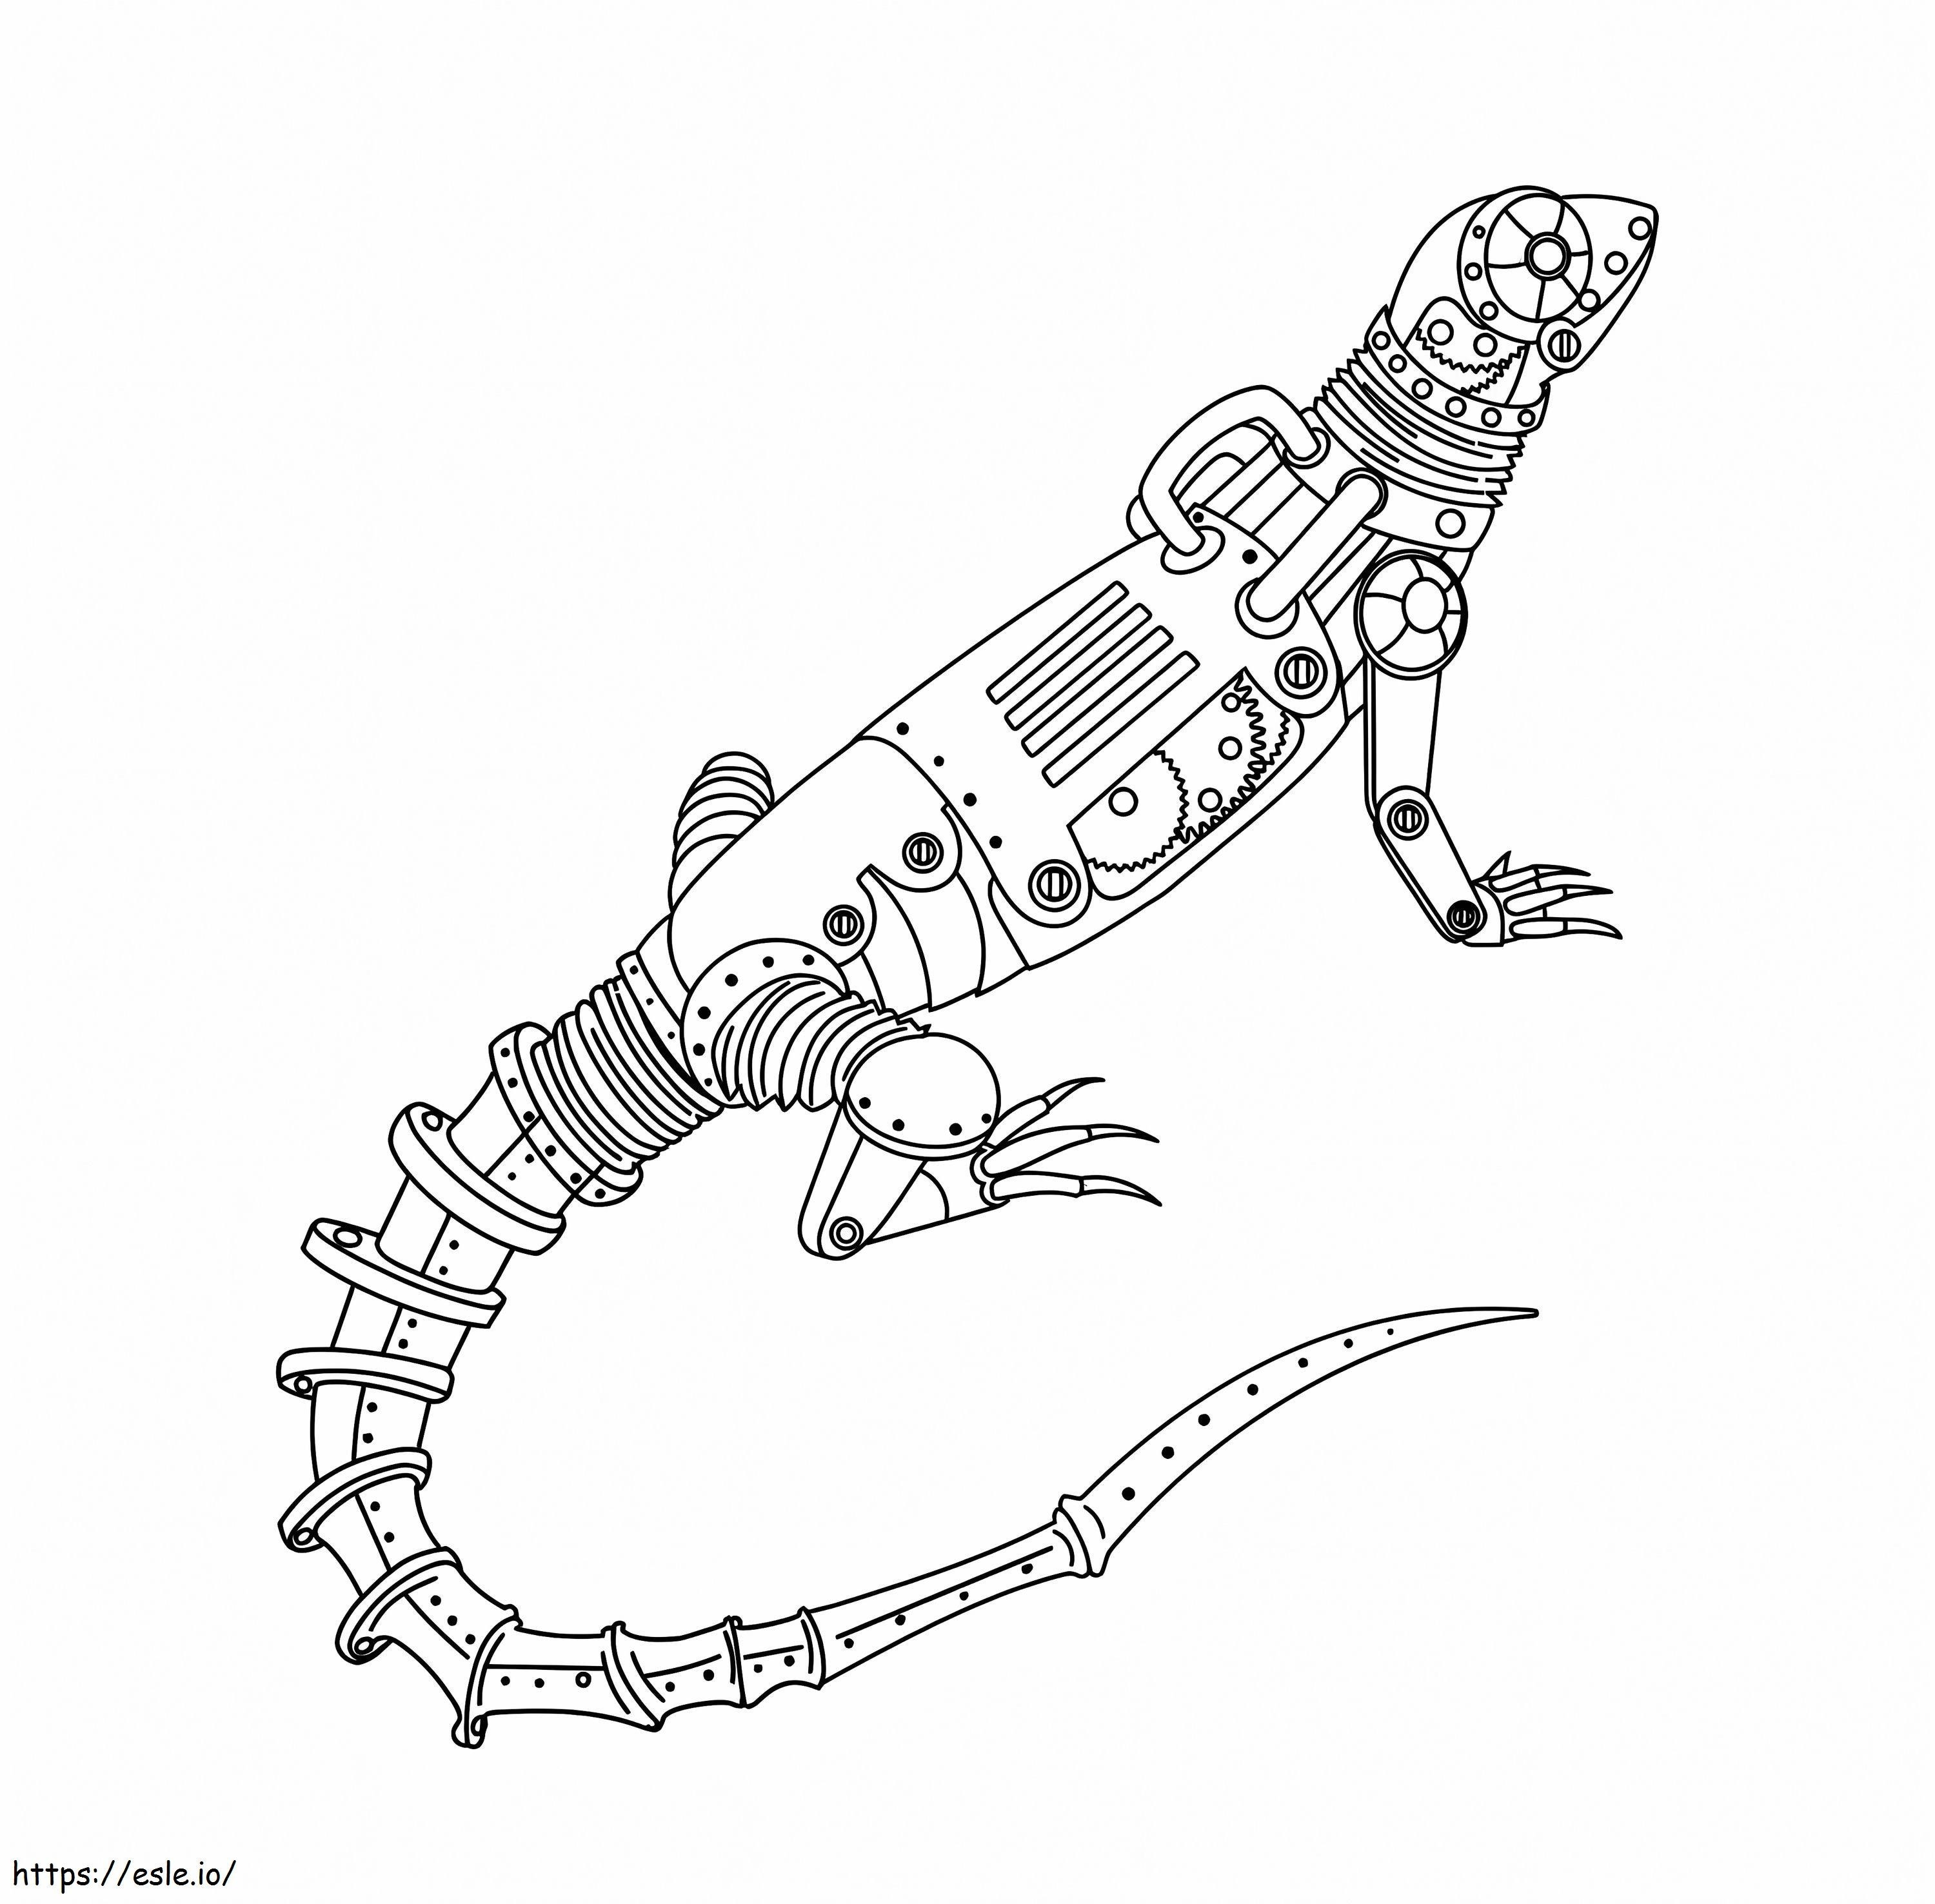 Lizard Robot coloring page